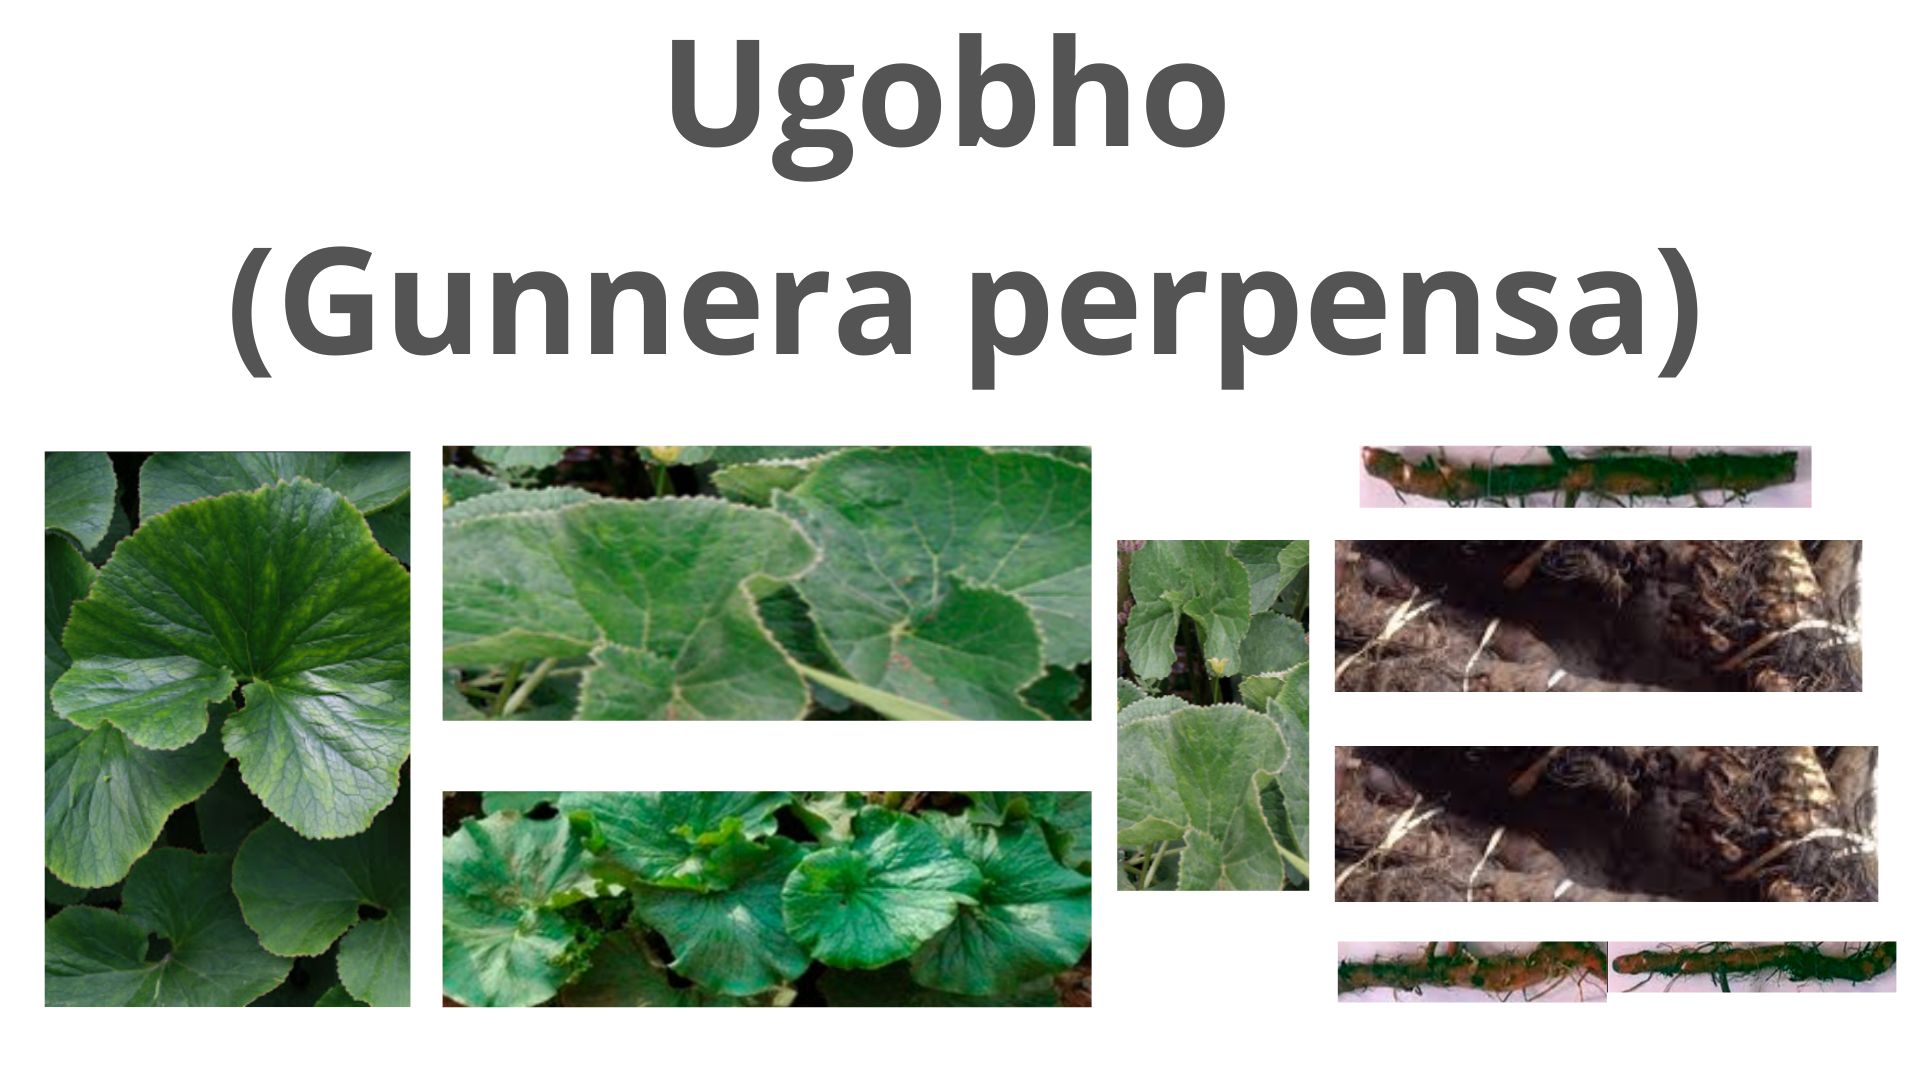 You are currently viewing Gunnera perpensa (Ugobho)